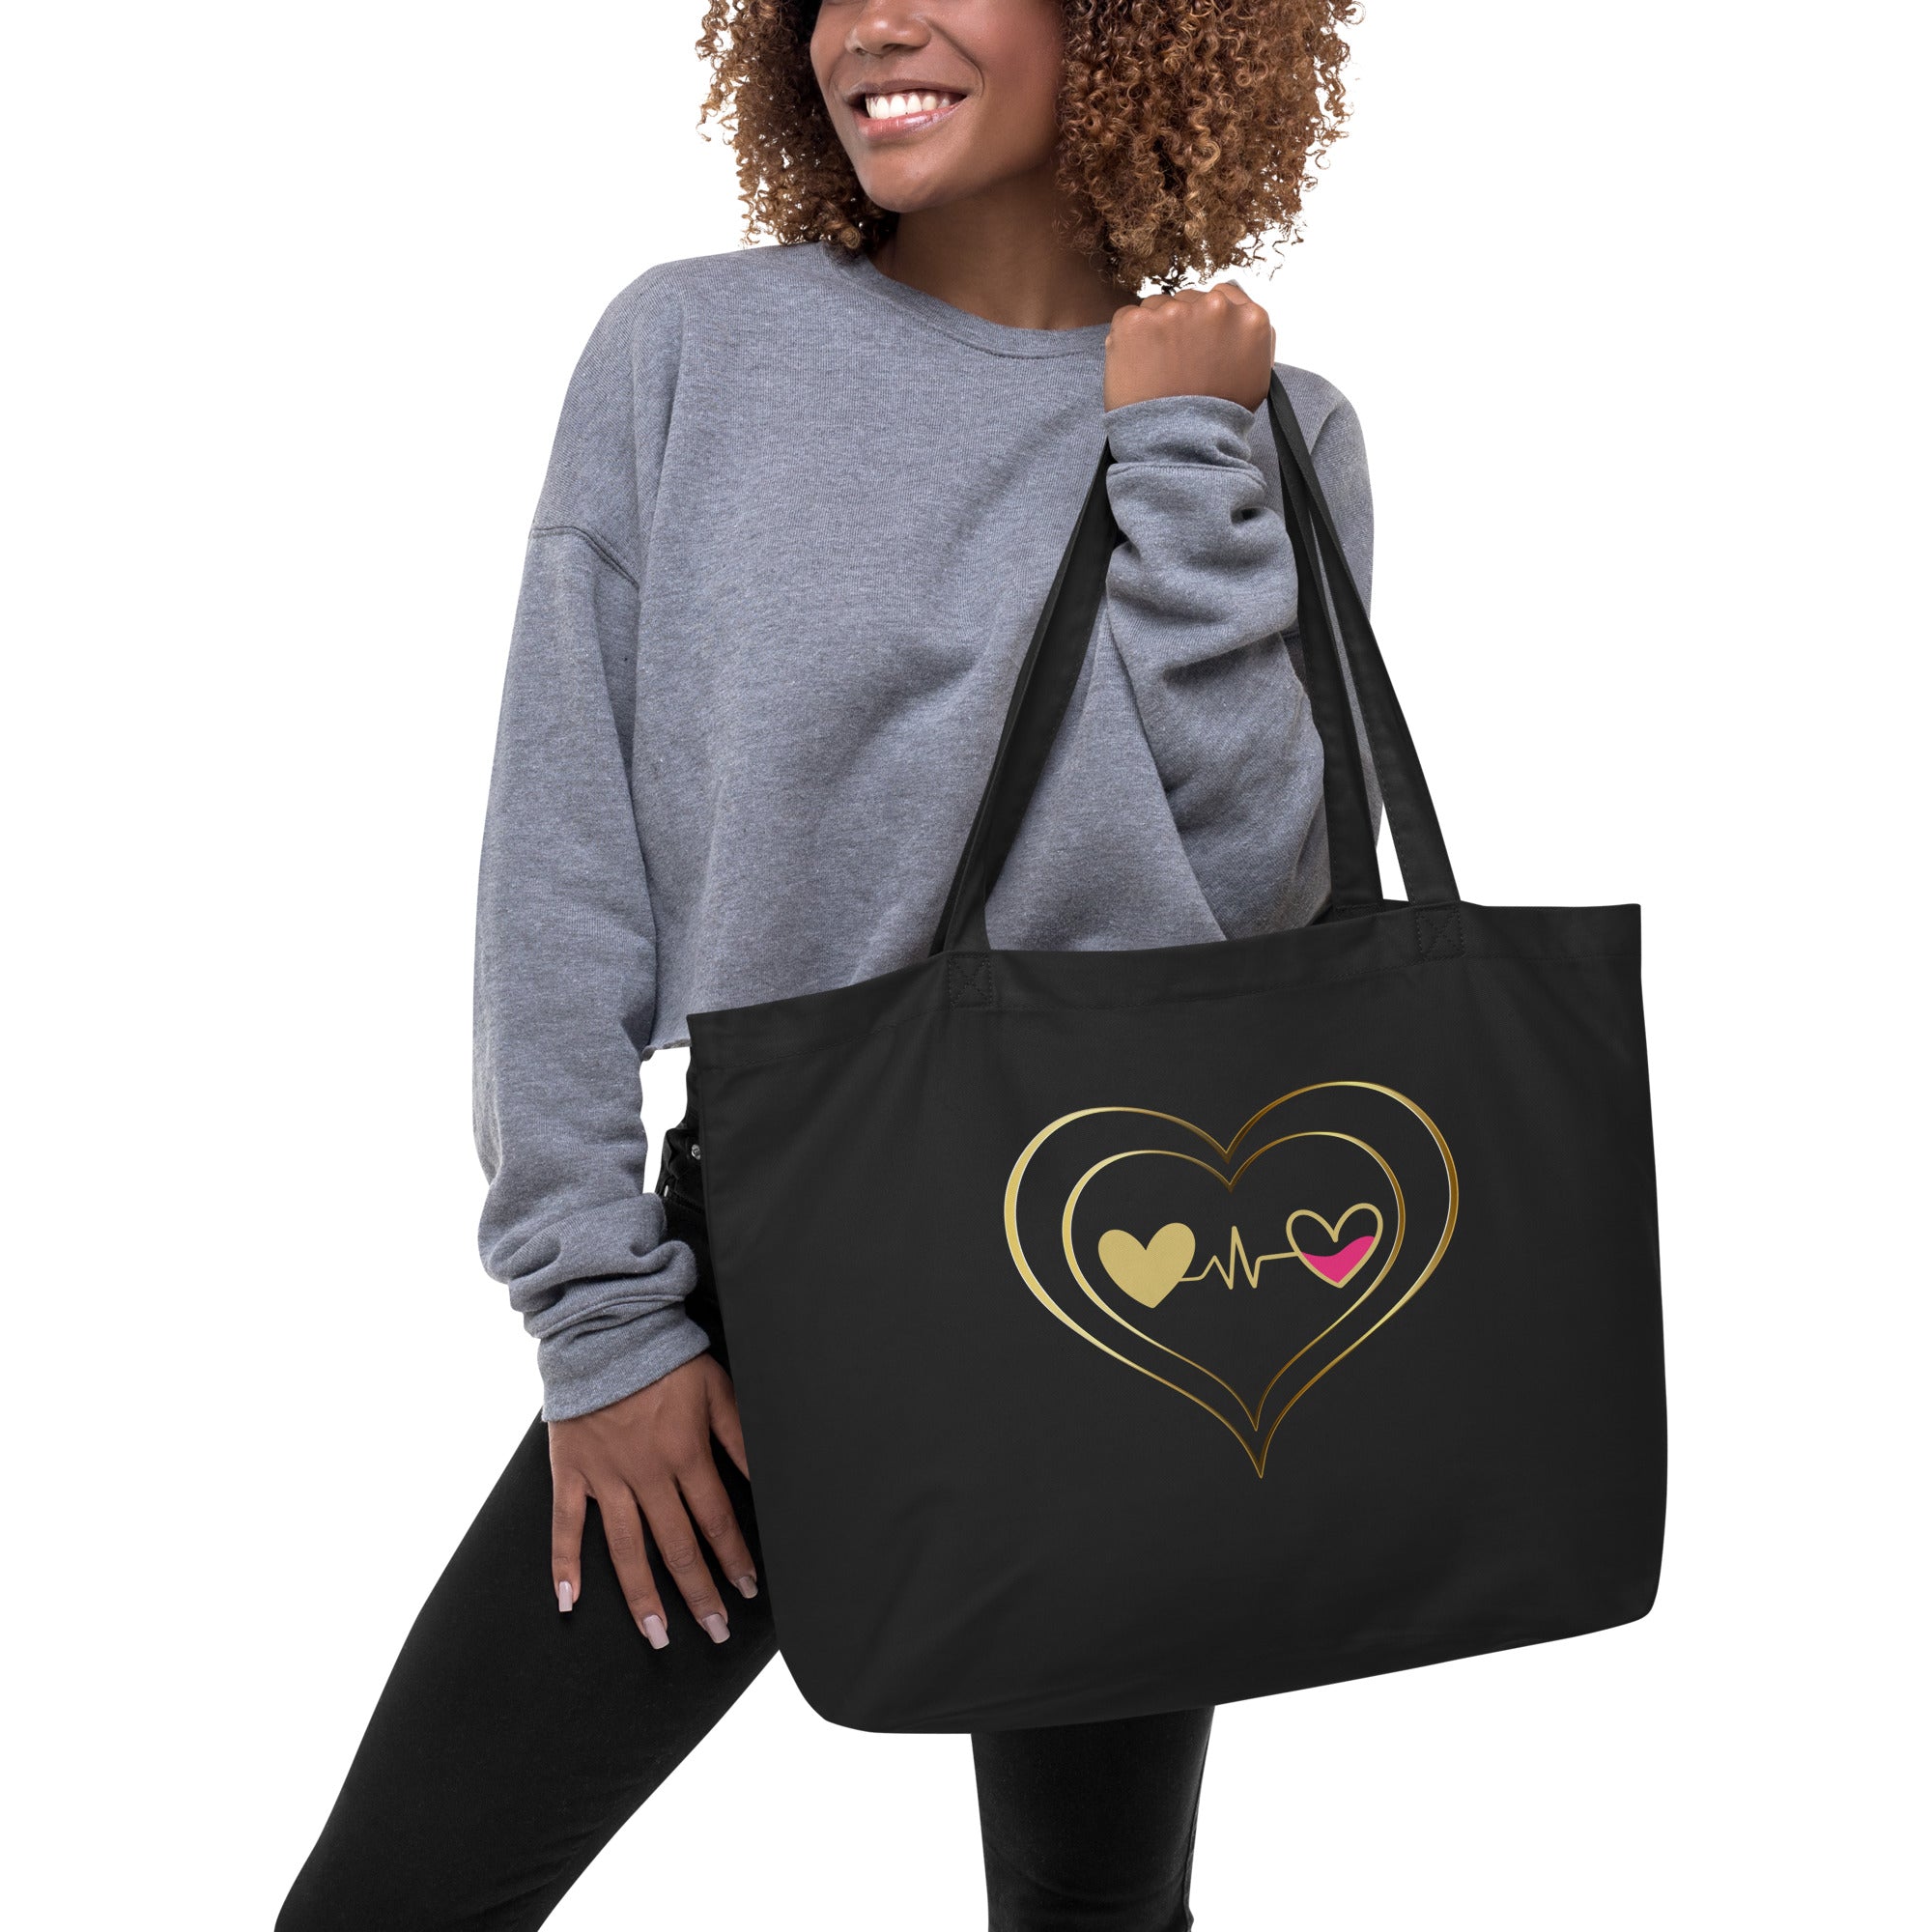 Connected Hearts Large organic tote bag